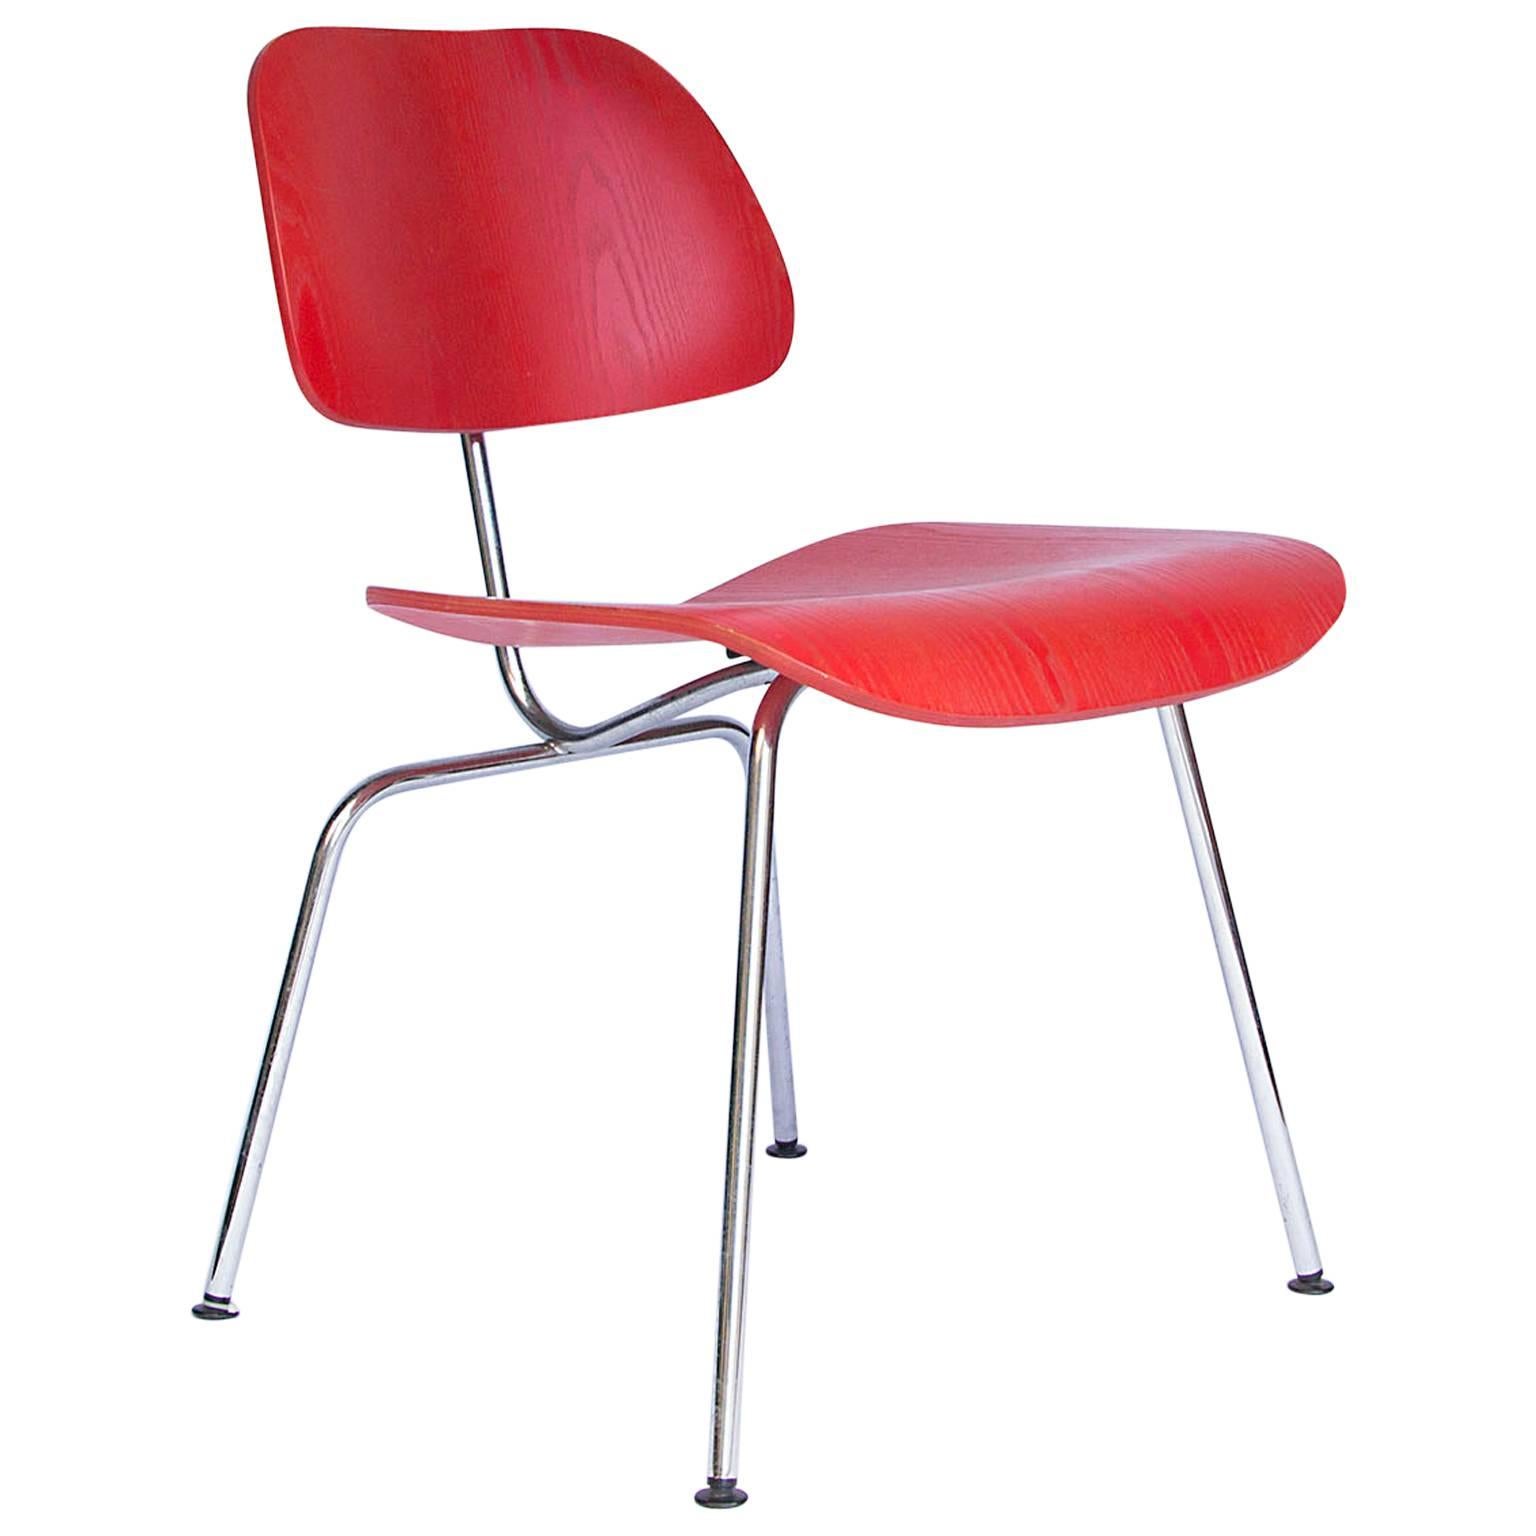 1946, Charles Eames, DCM in Ash, Original by Vitra Painted in Red